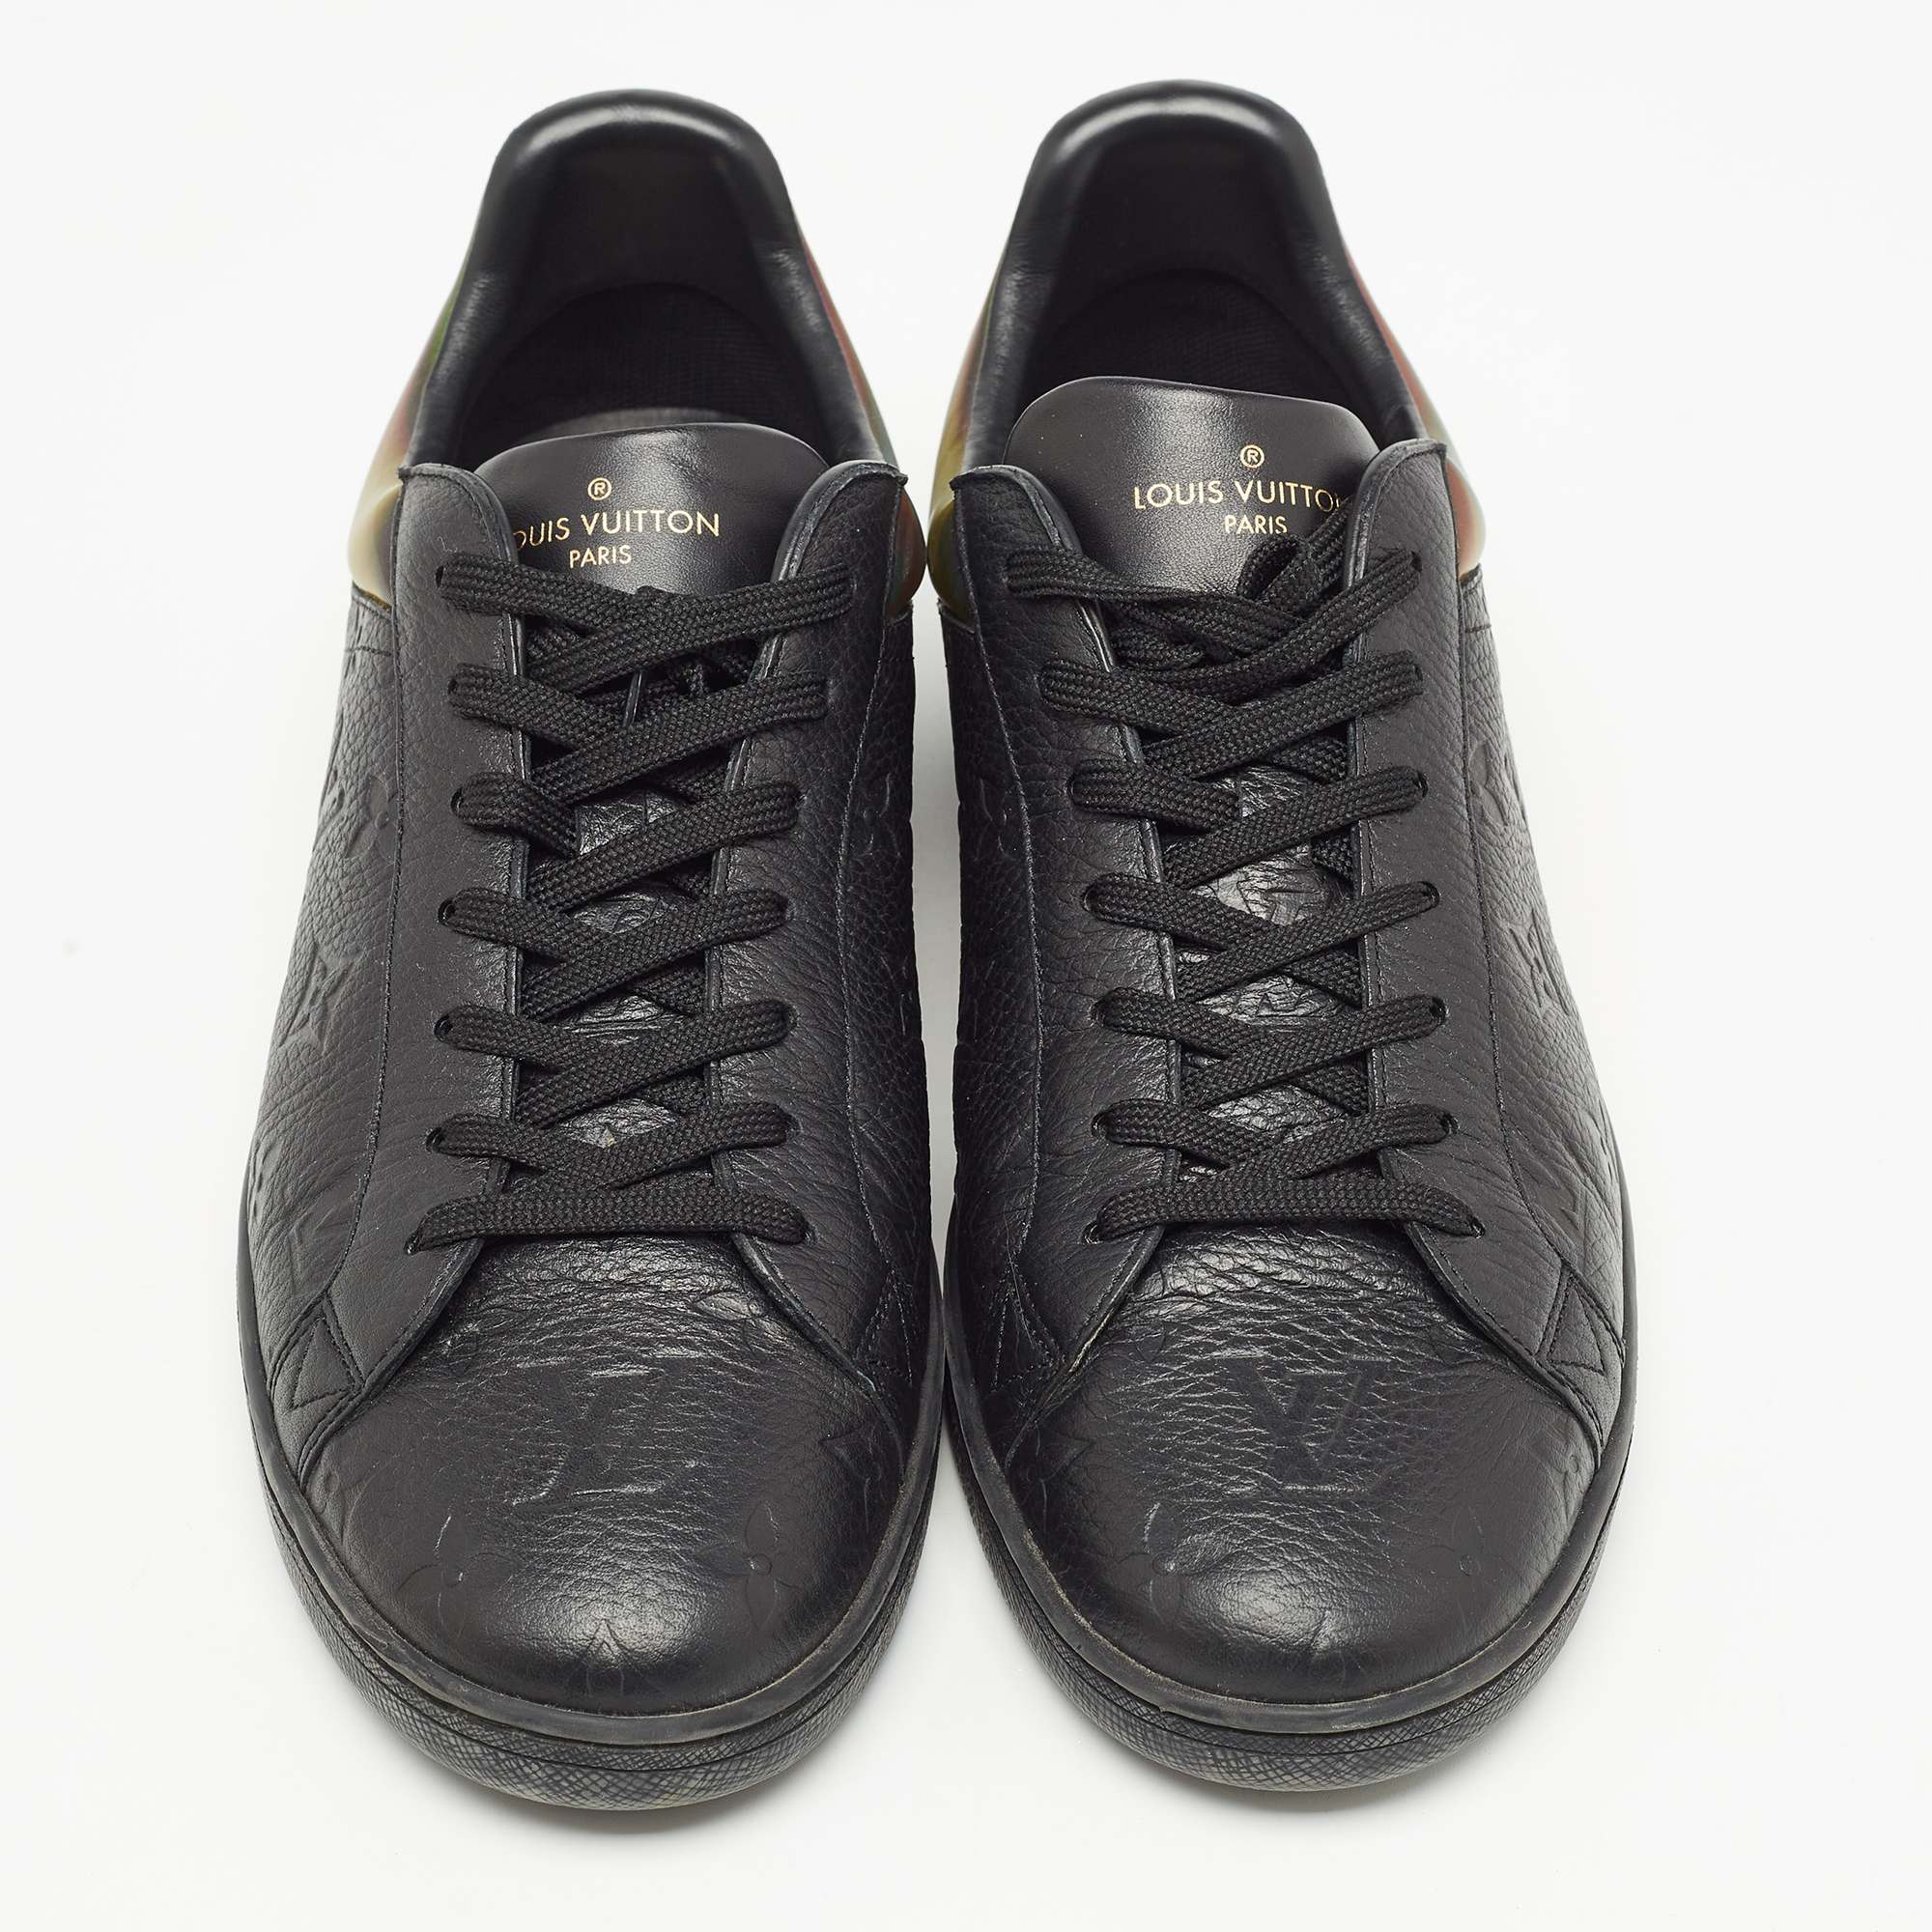 Louis Vuitton Black Monogram Embossed Leather Luxembourg Sneakers Size 42.5